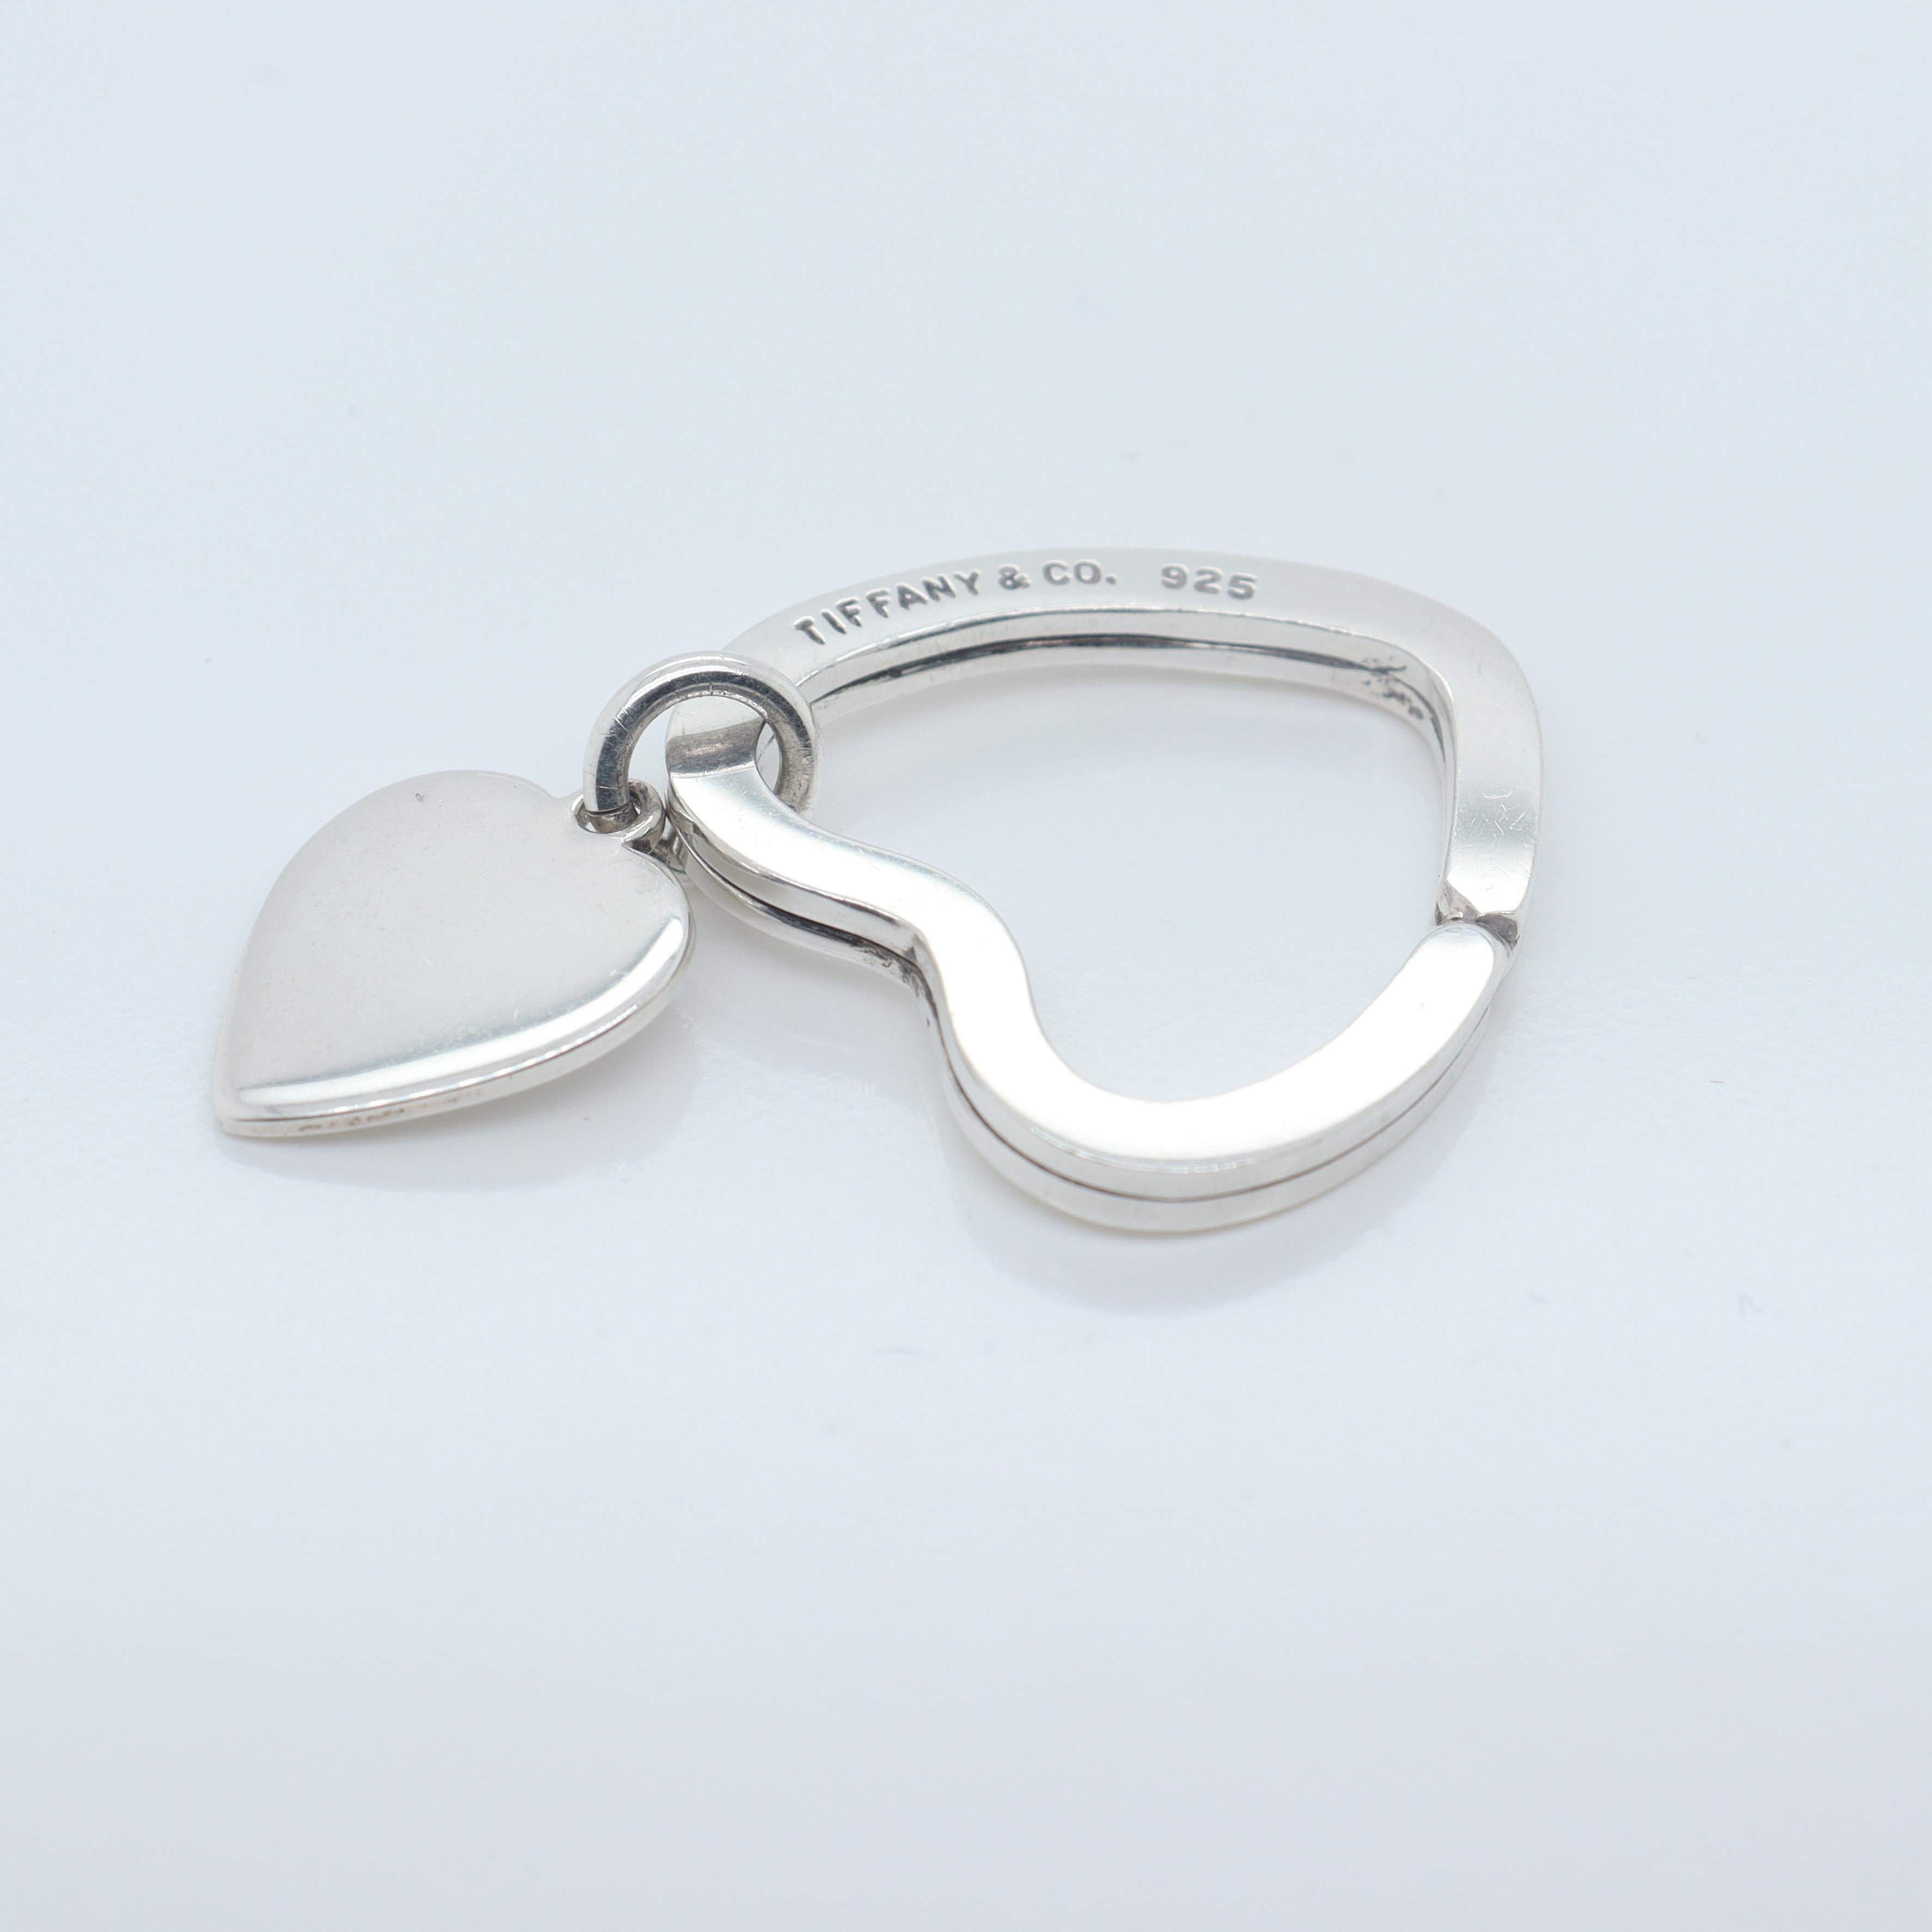 Tiffany and Co. Sterling Silver Heart Shaped Key Holder or Ring